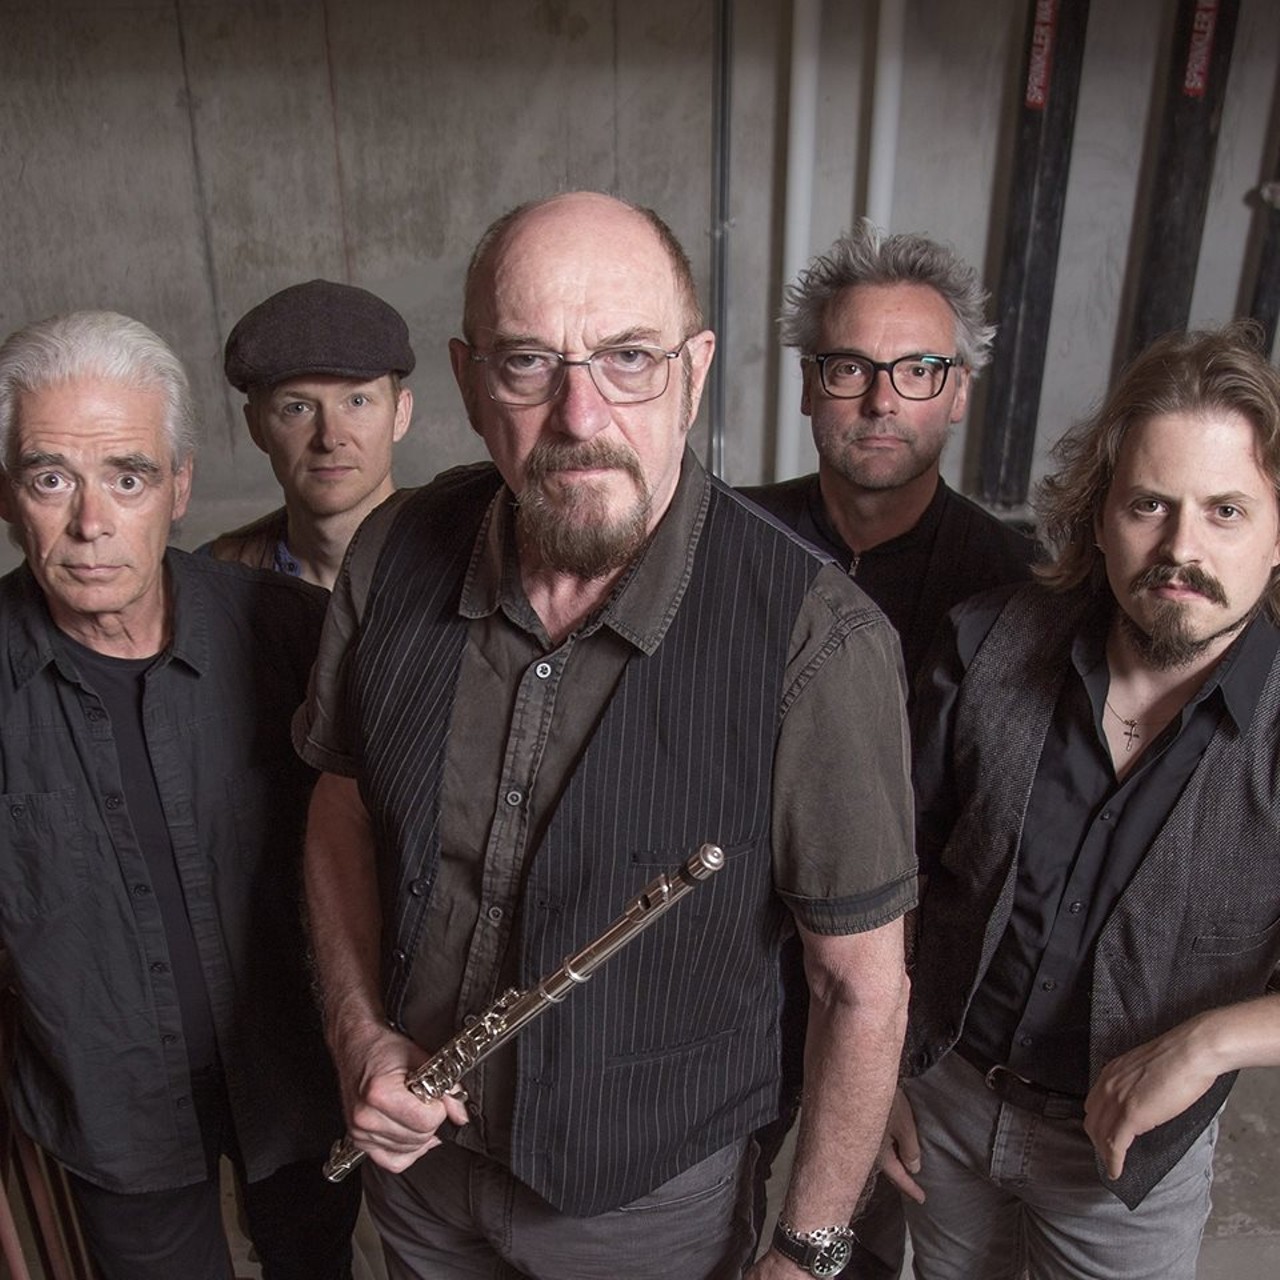 Jethro Tull
Freedom Hill, July 1, 7:30 p.m., $30+
For half a century, Jethro Tull has proven the flute can rock if you just try hard enough. Catch them at Freedom Hill on their 50 Year Anniversary Tour.
Photo via Facebook